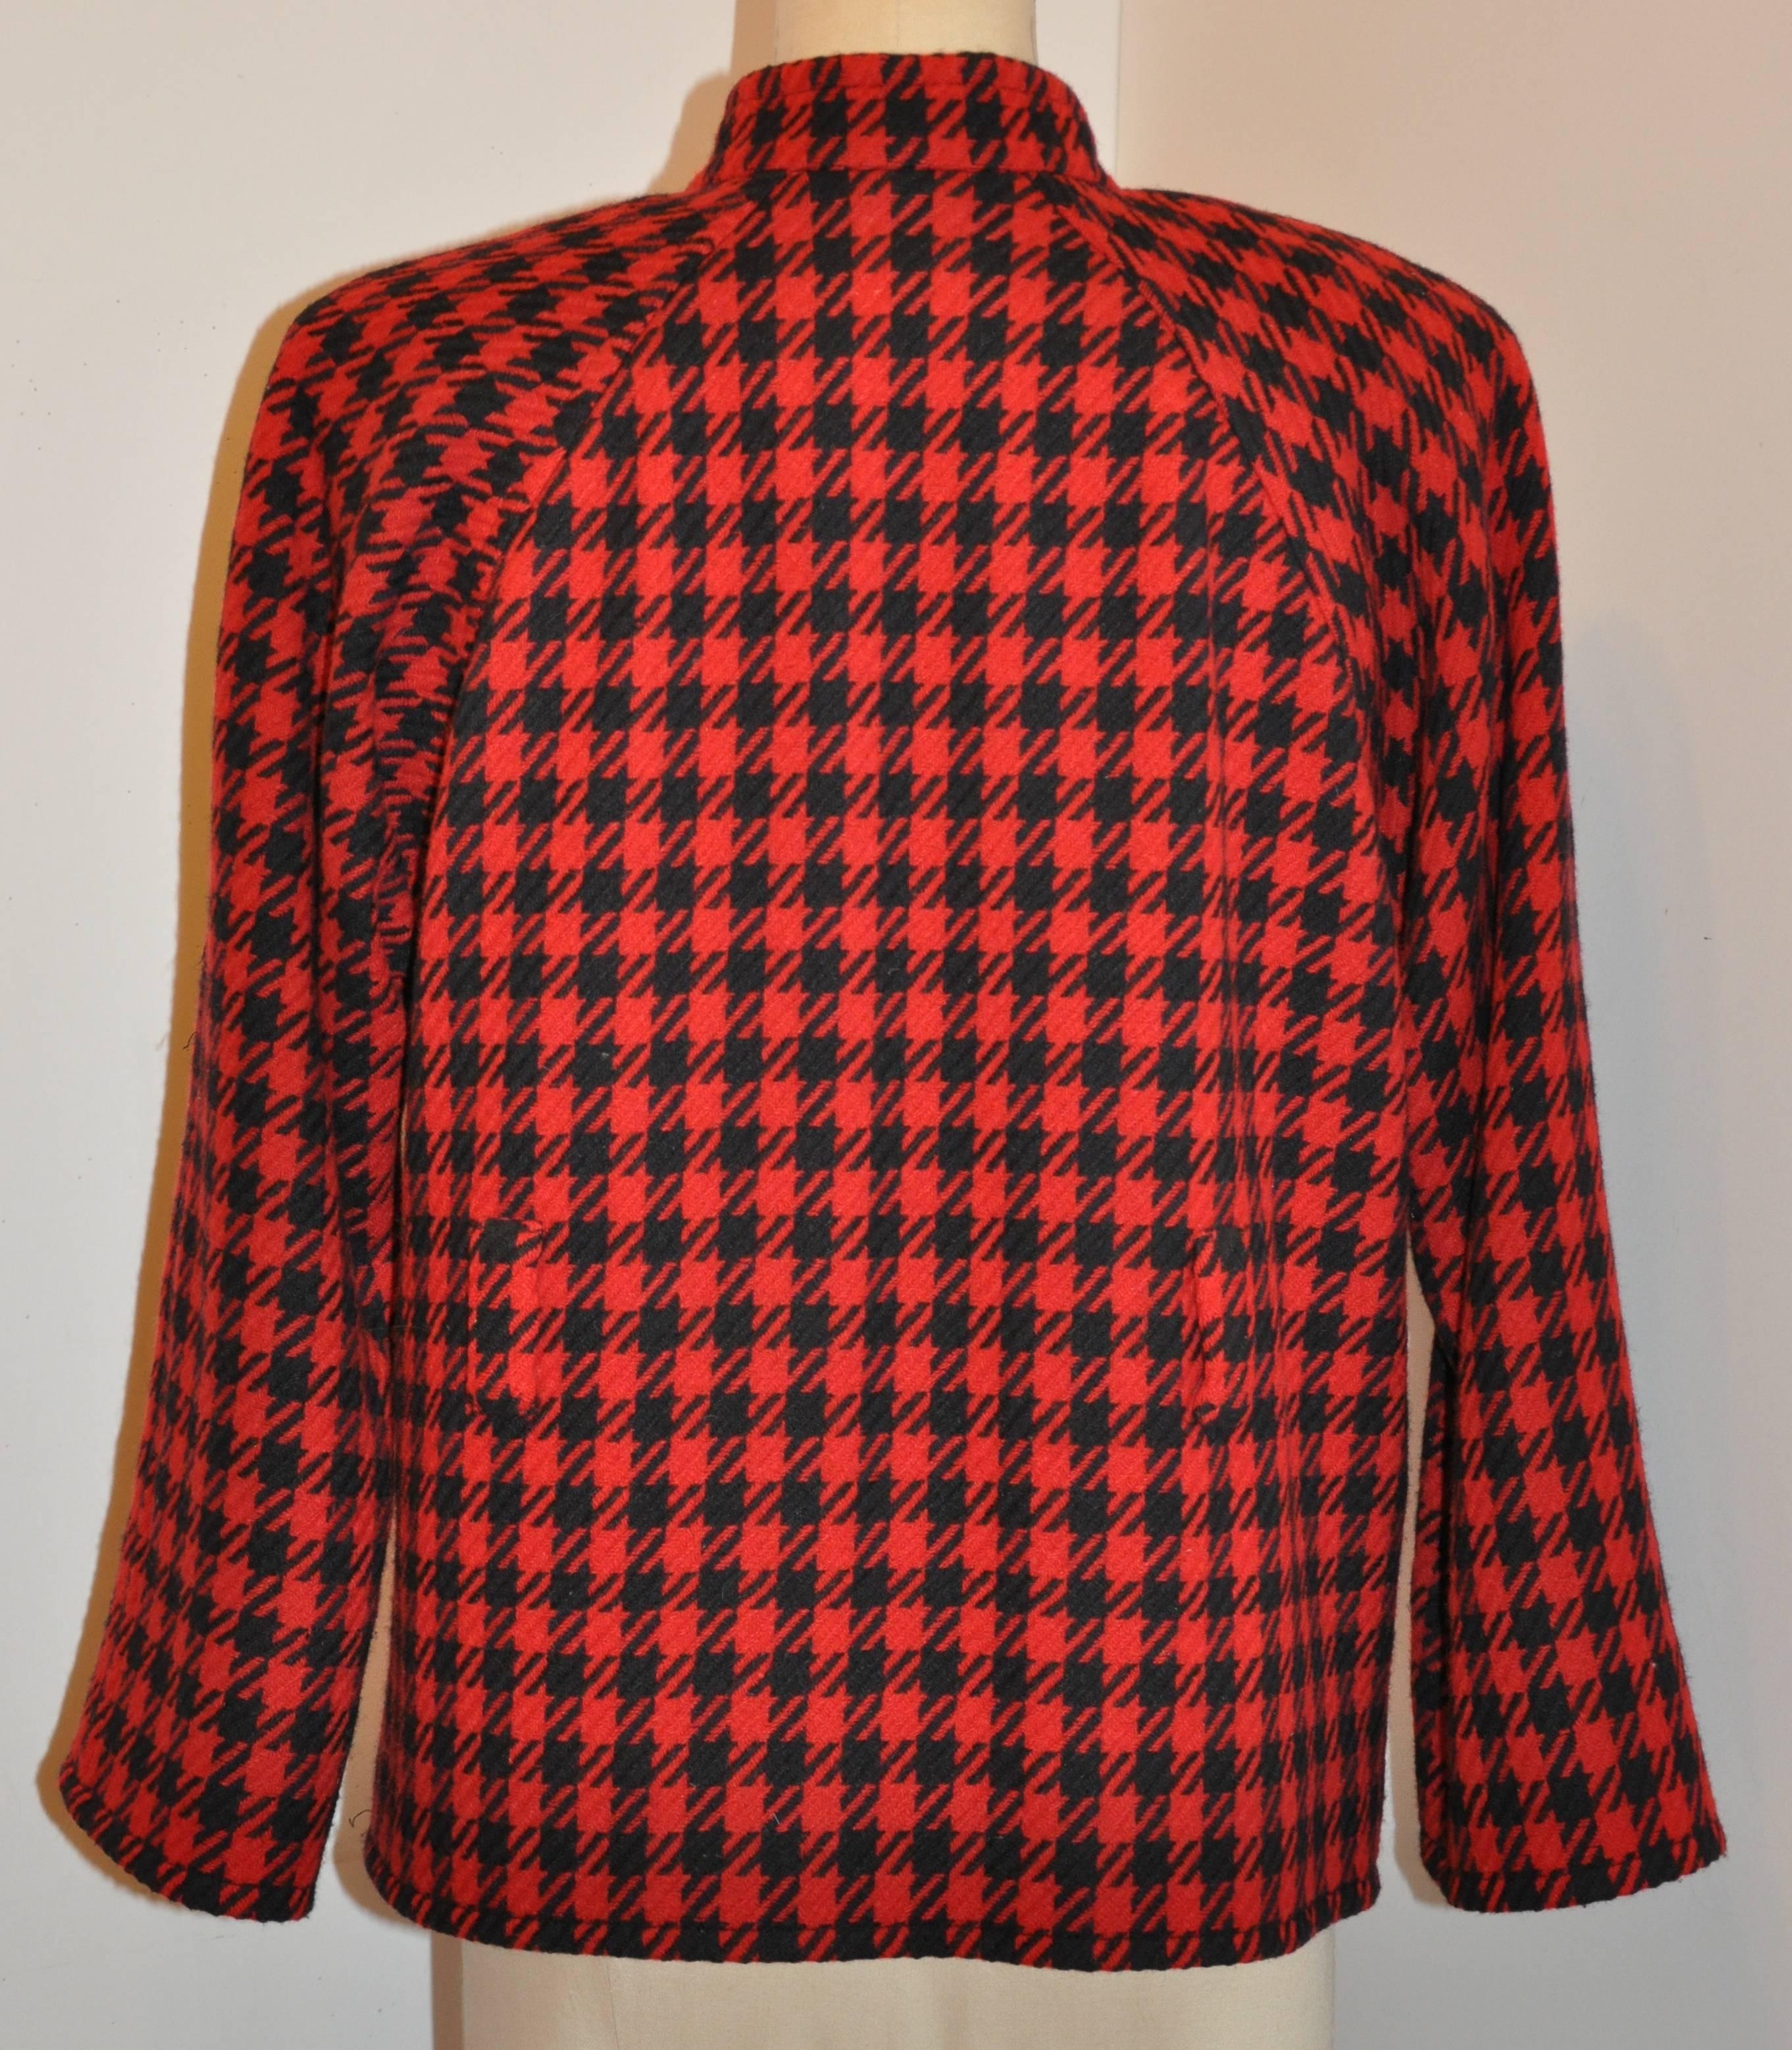 red and black checkered jacket